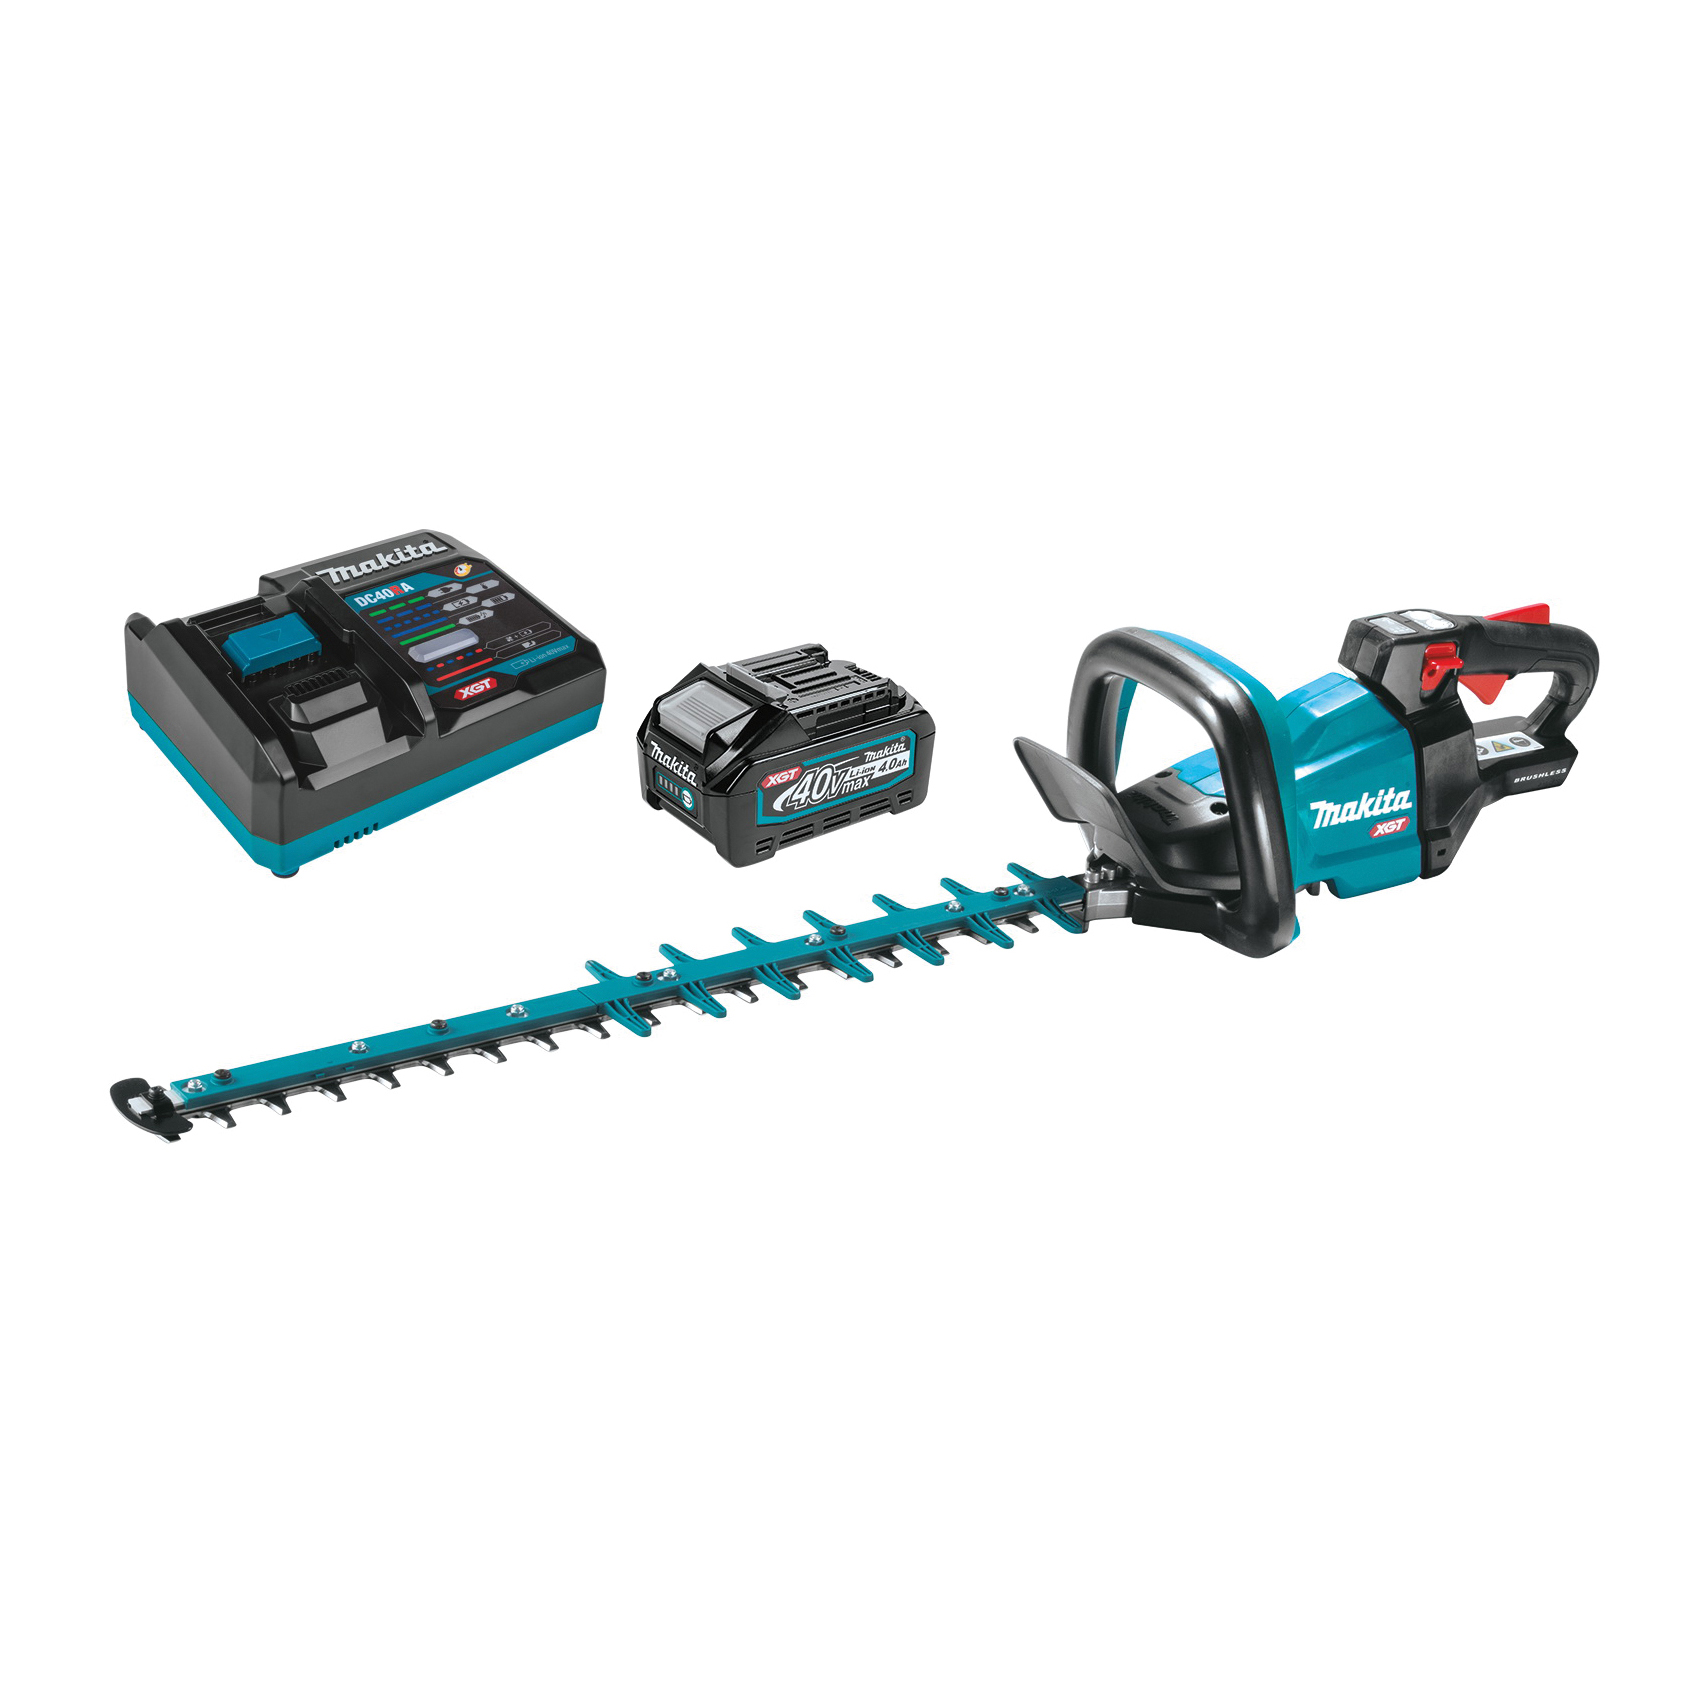 XGT Series GHU02M1 Hedge Trimmer Kit, Battery Included, 4 Ah, 40 V, Lithium-Ion, 3/8 in Cutting Capacity